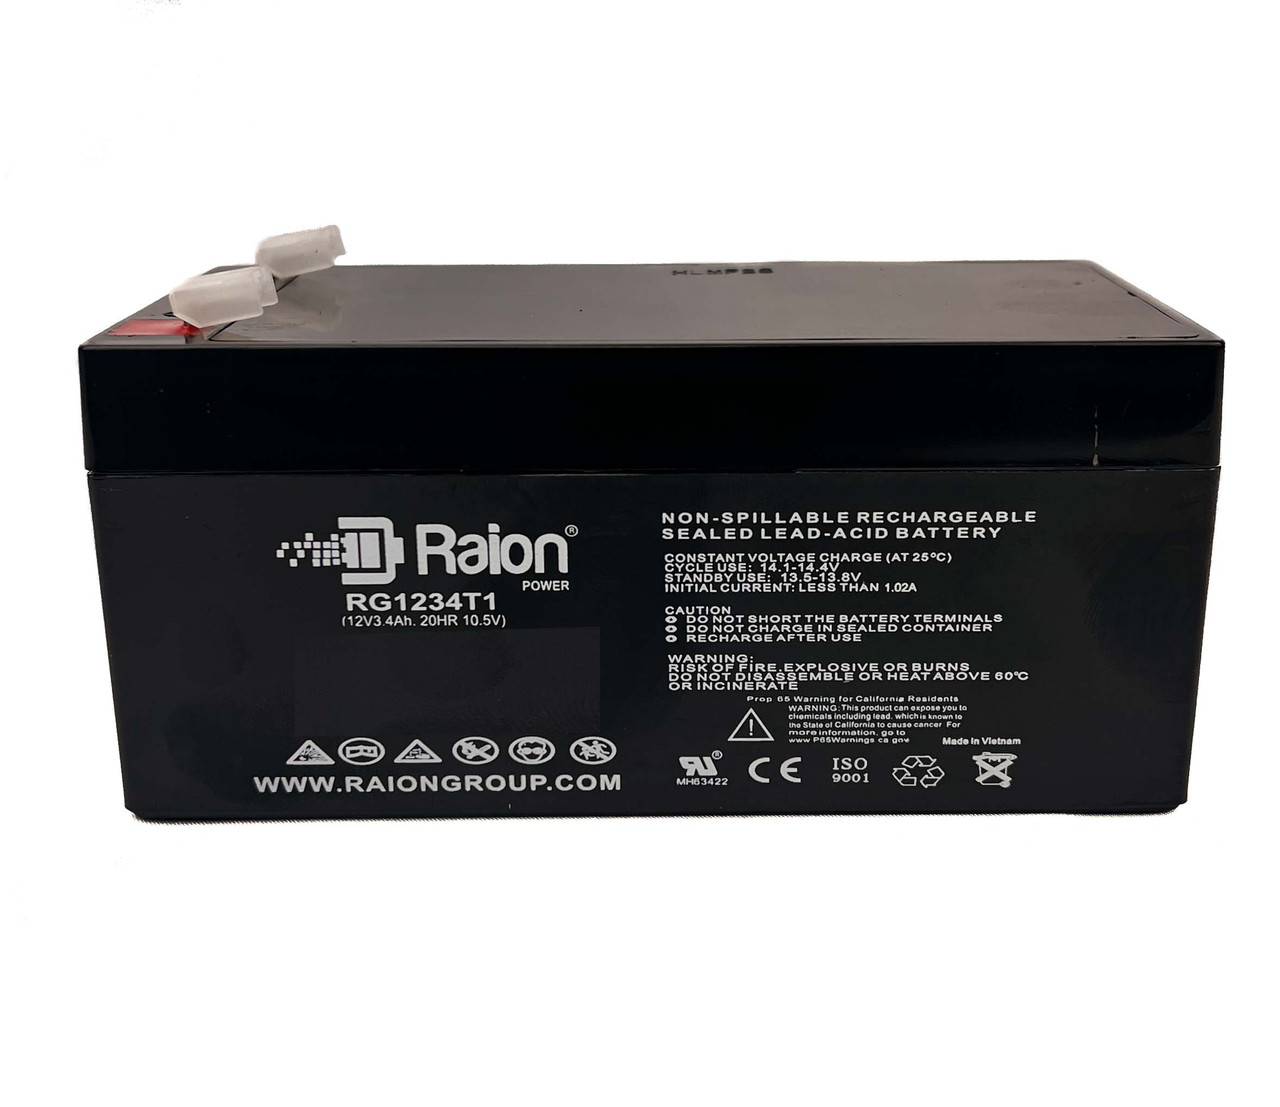 Raion Power RG1234T1 Rechargeable Compatible Replacement Battery for Park Medical Electronics Lab 1051 Mini Lab